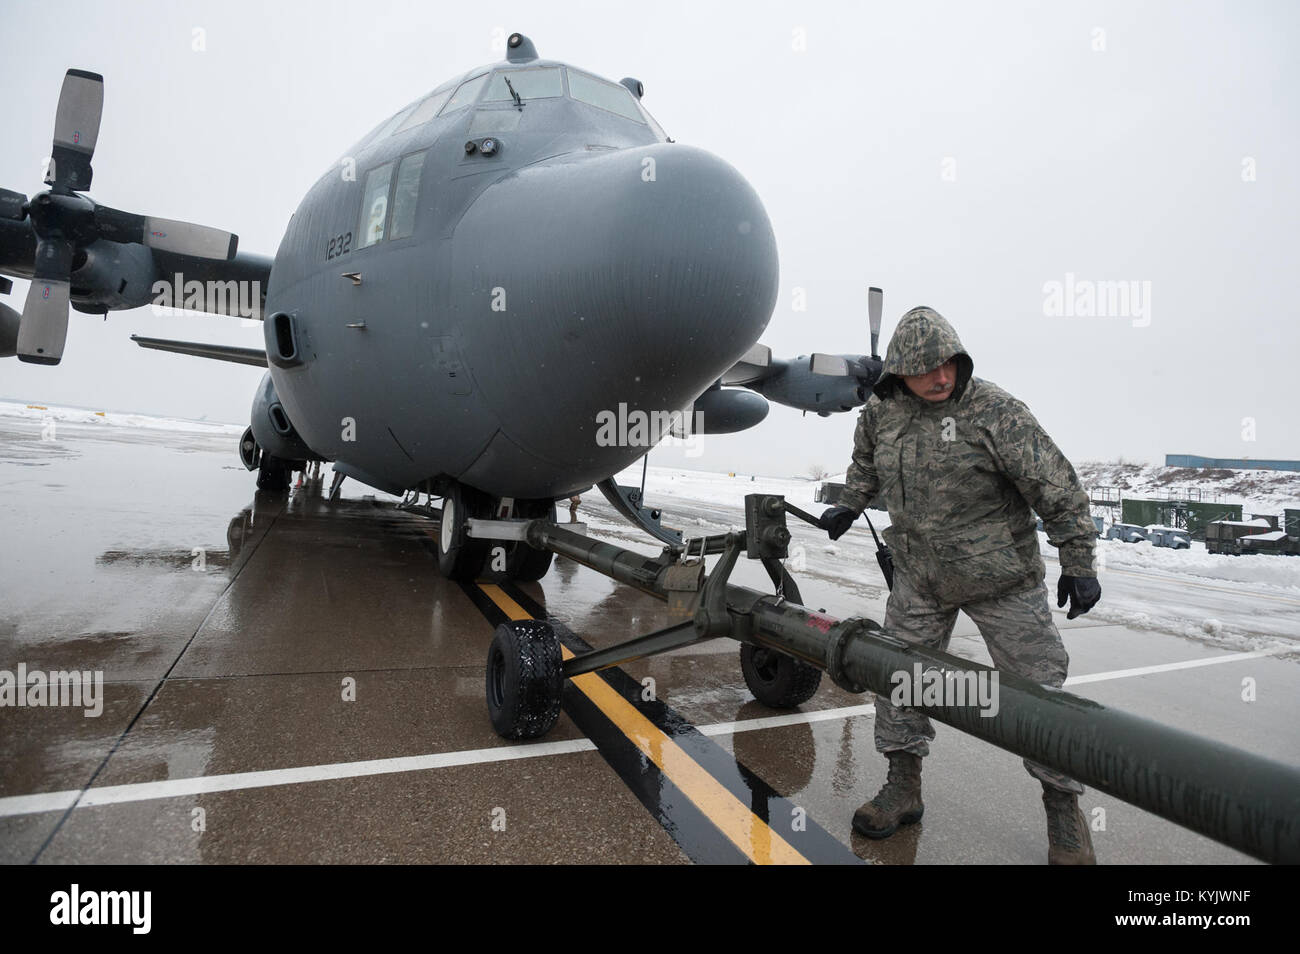 Master Sgt. Carl Shaffer, a C-130 crew chief in the 123rd Aircraft Maintenance Squadron, works to disconnect a tow bar from a C-130 Hercules aircraft on the flight line of the Kentucky Air National Guard Base in Louisville, Ky., Feb. 21, 2015. The aircraft, which subsequently departed for the Persian Gulf along with 37 deploying Kentucky Air Guardsmen, was being housed in a hangar because of severe weather conditions. (U.S. Air National Guard photo by Maj. Dale Greer) Stock Photo